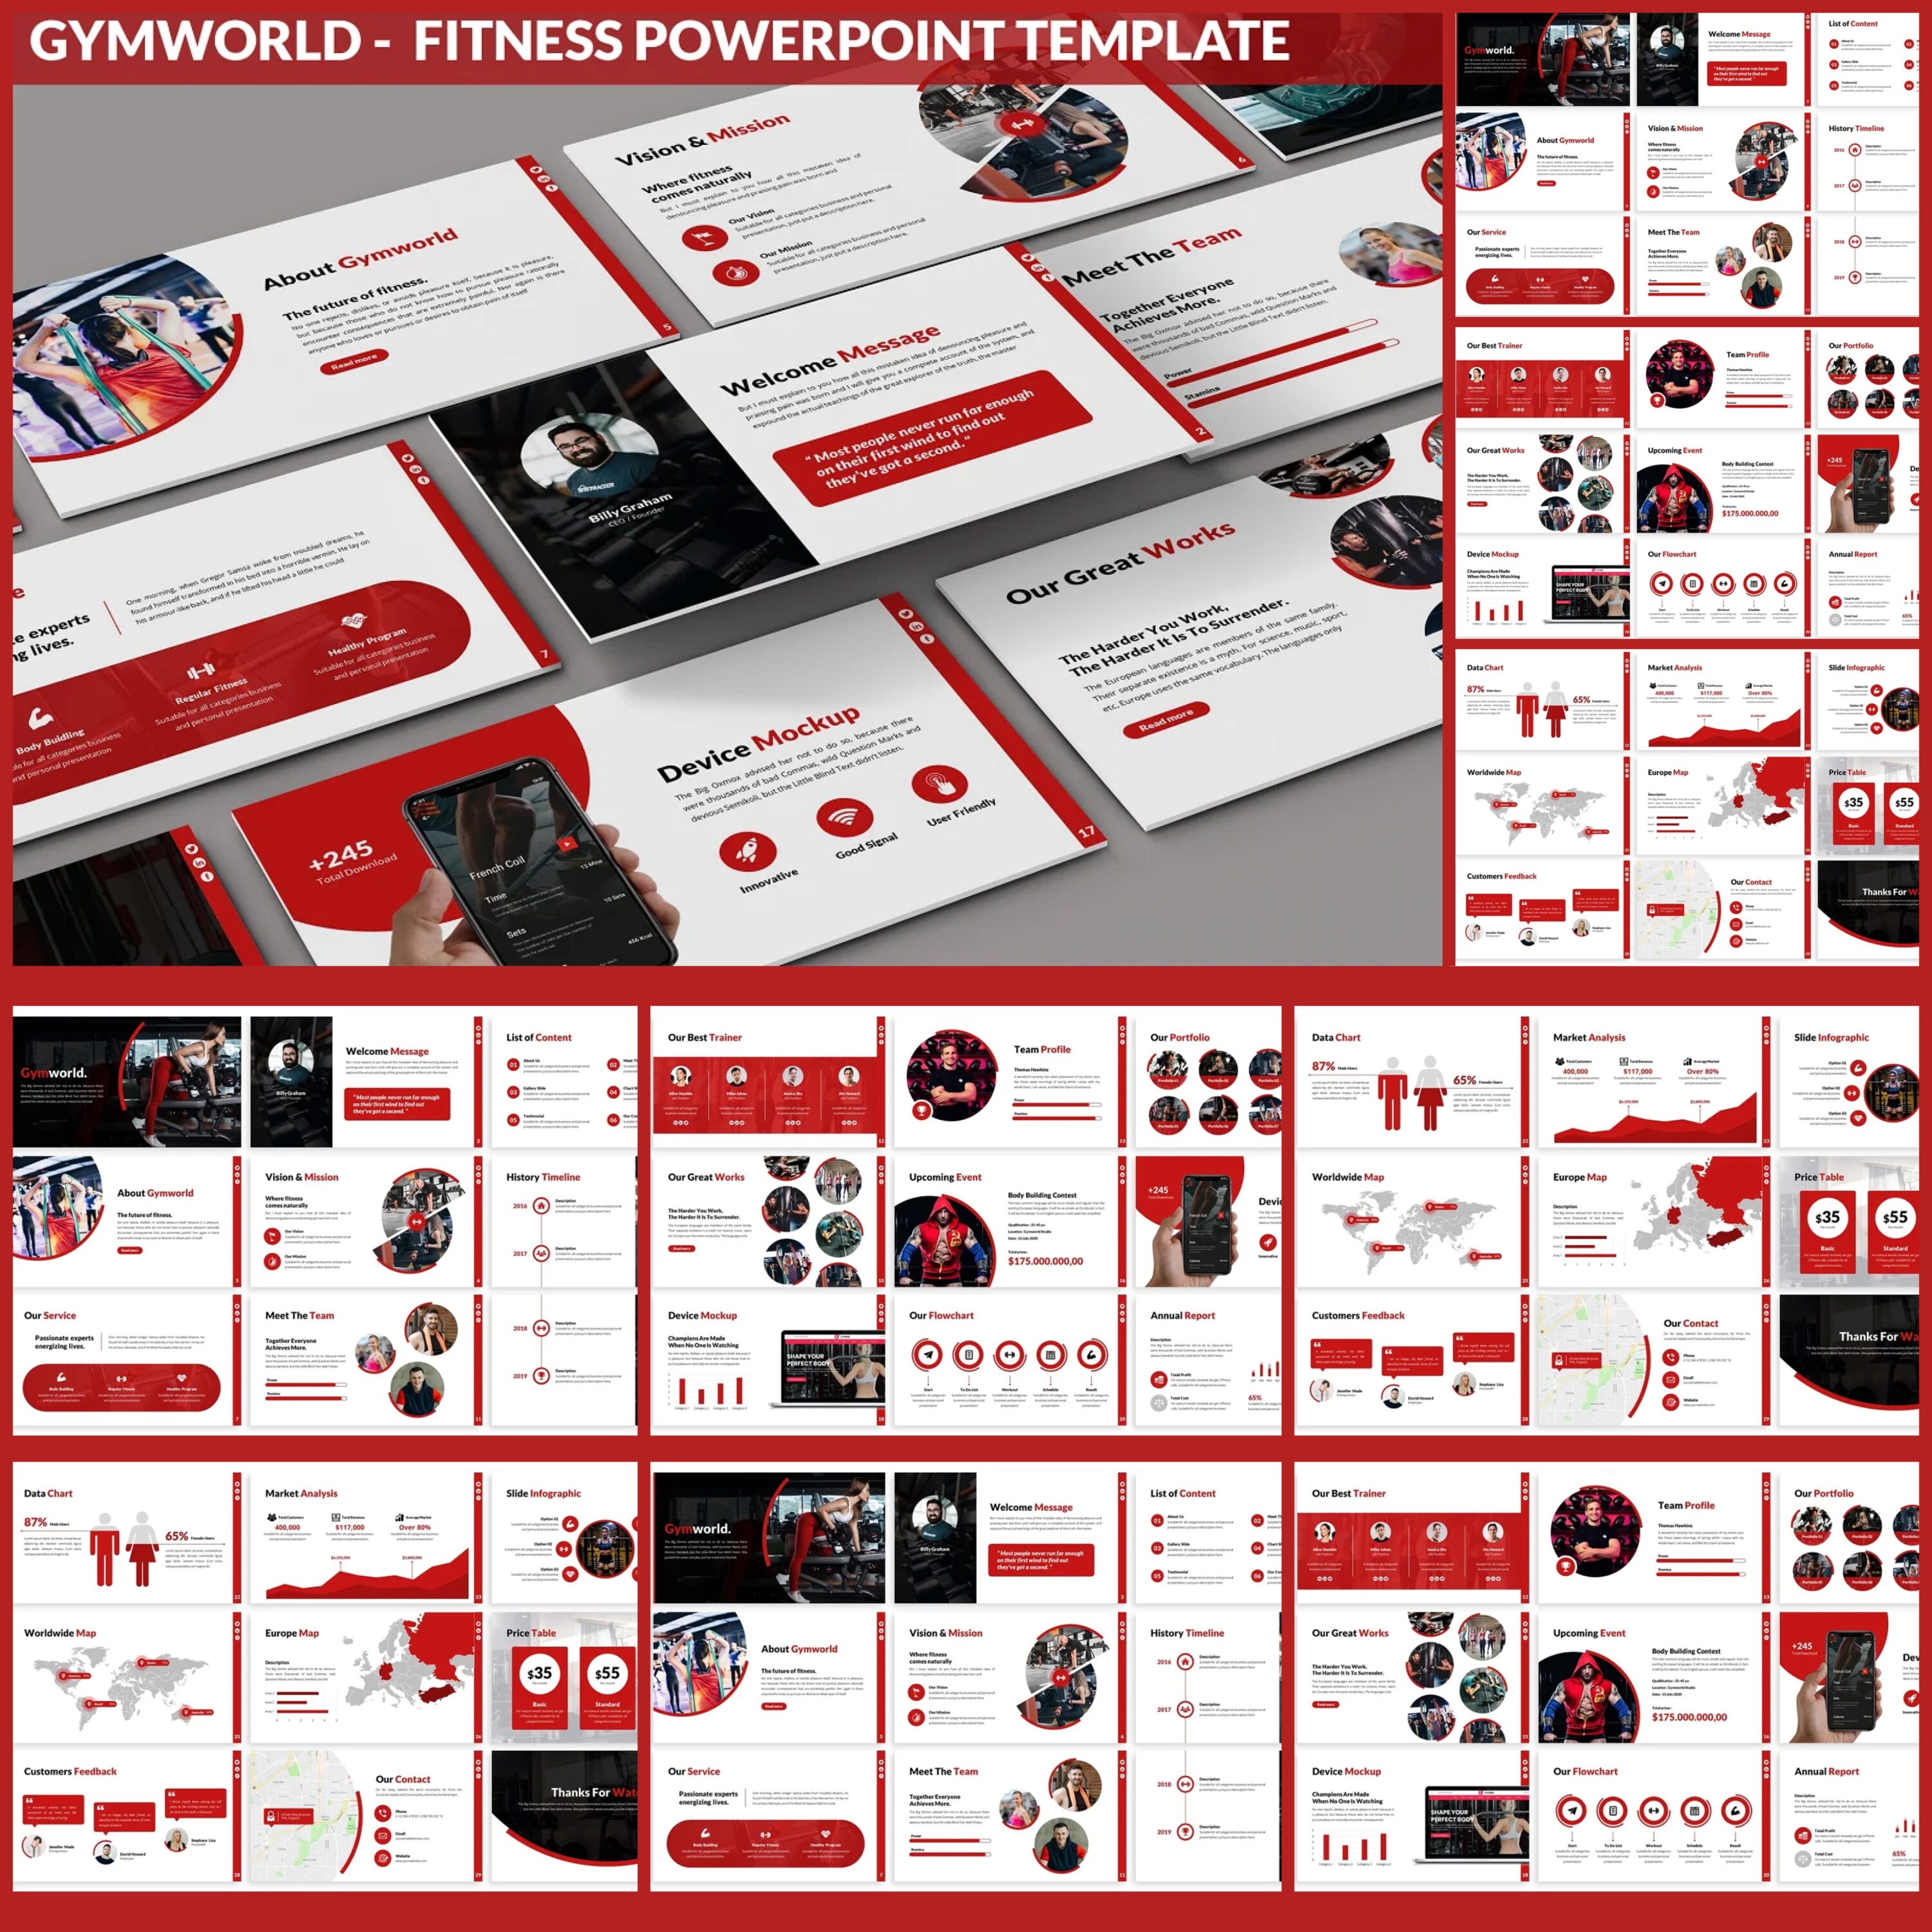 Gymworld - Fitness Powerpoint cover.